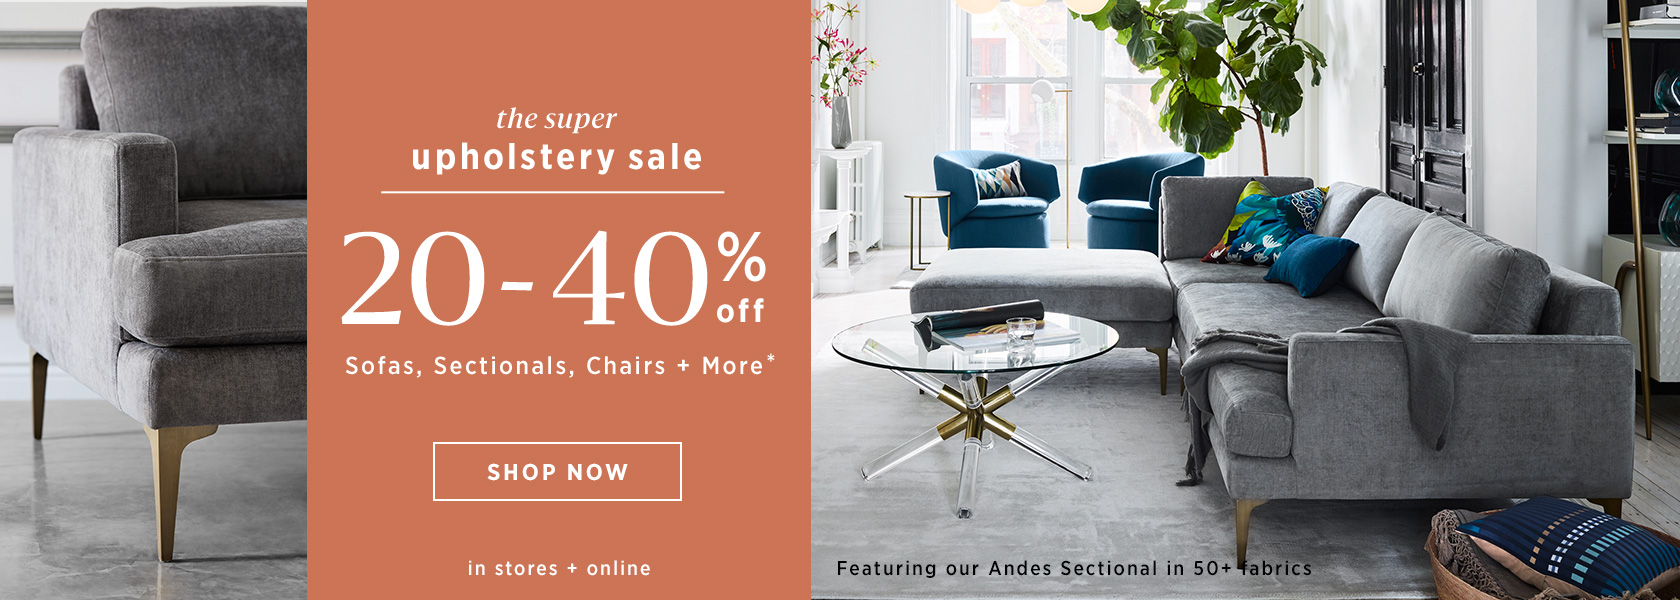 20-40% Off Sofas, Sectionals, Chairs + More